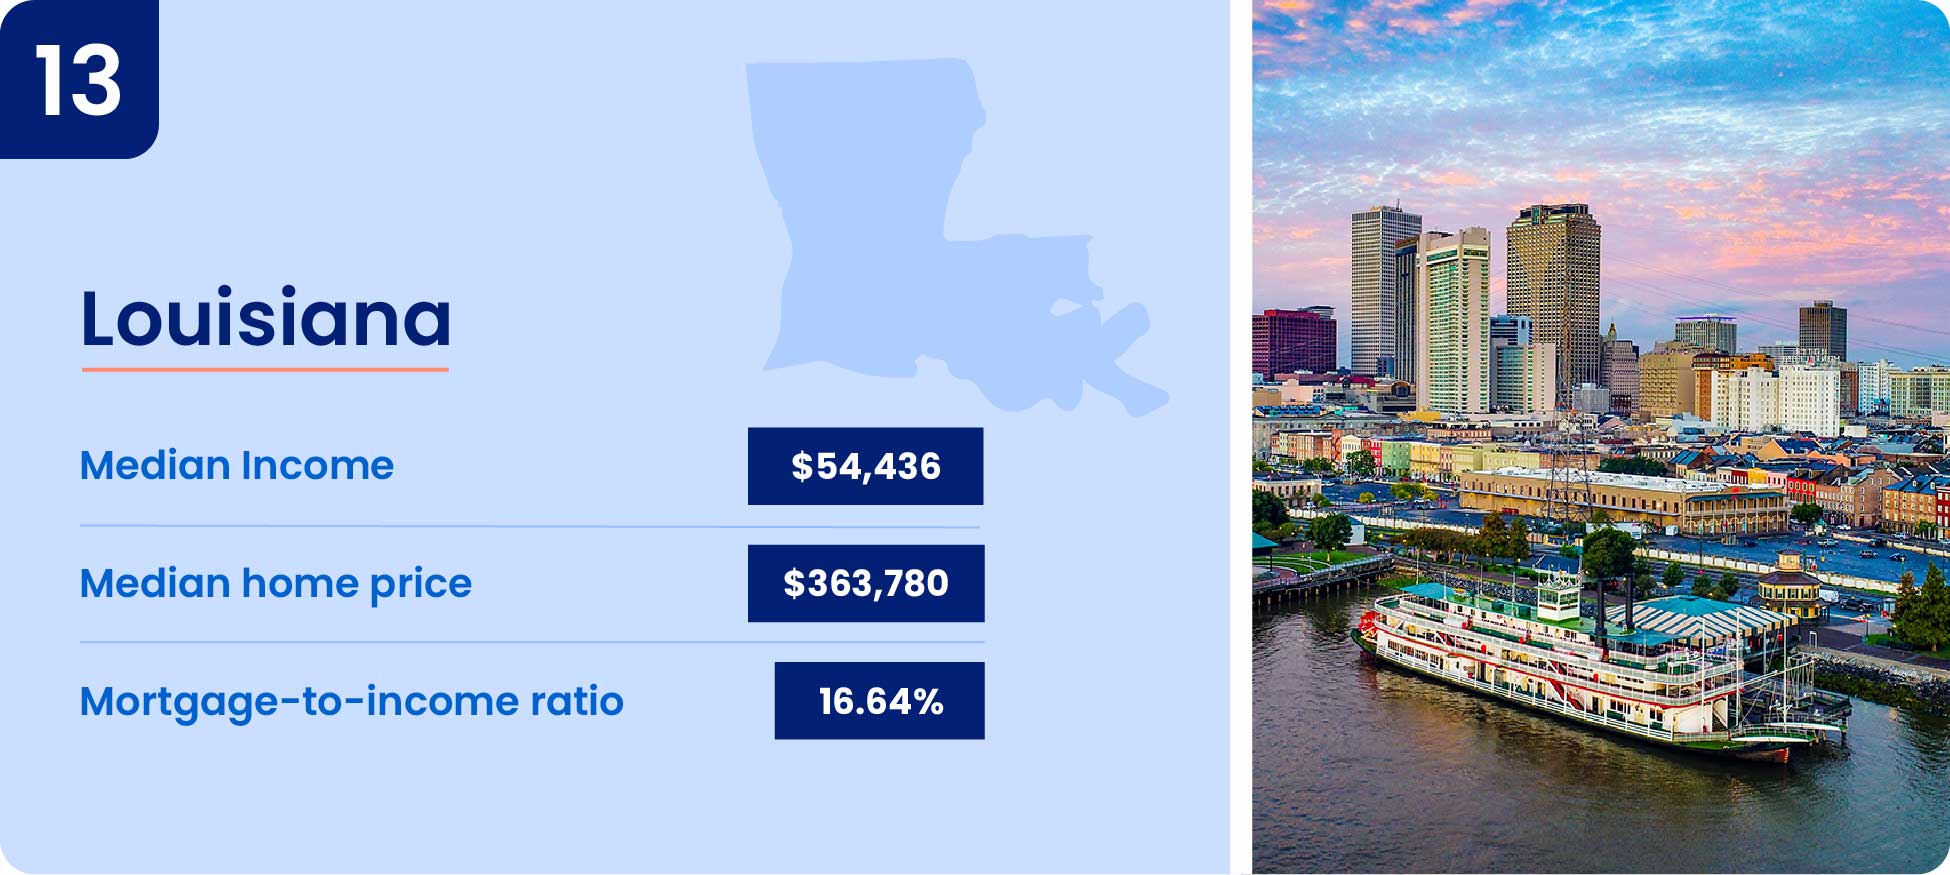 Image shows why one of the cheapest states to buy a house is Louisiana.